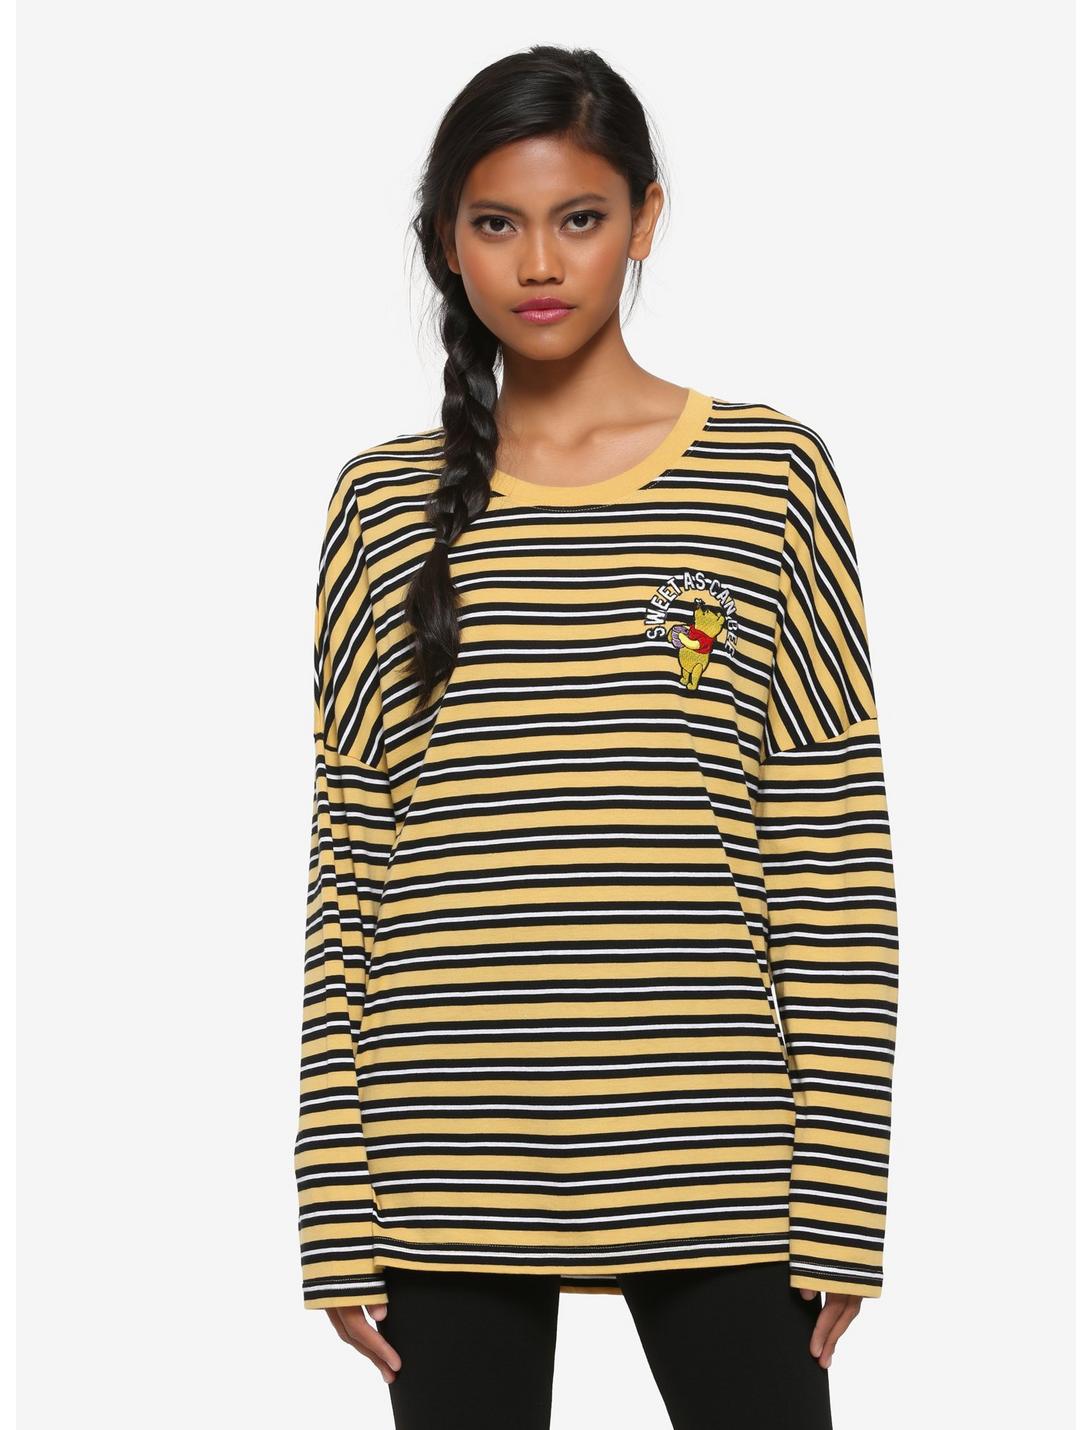 Disney Winnie the Pooh Striped Women's Long Sleeve T-Shirt - BoxLunch Exclusive, YELLOW, hi-res